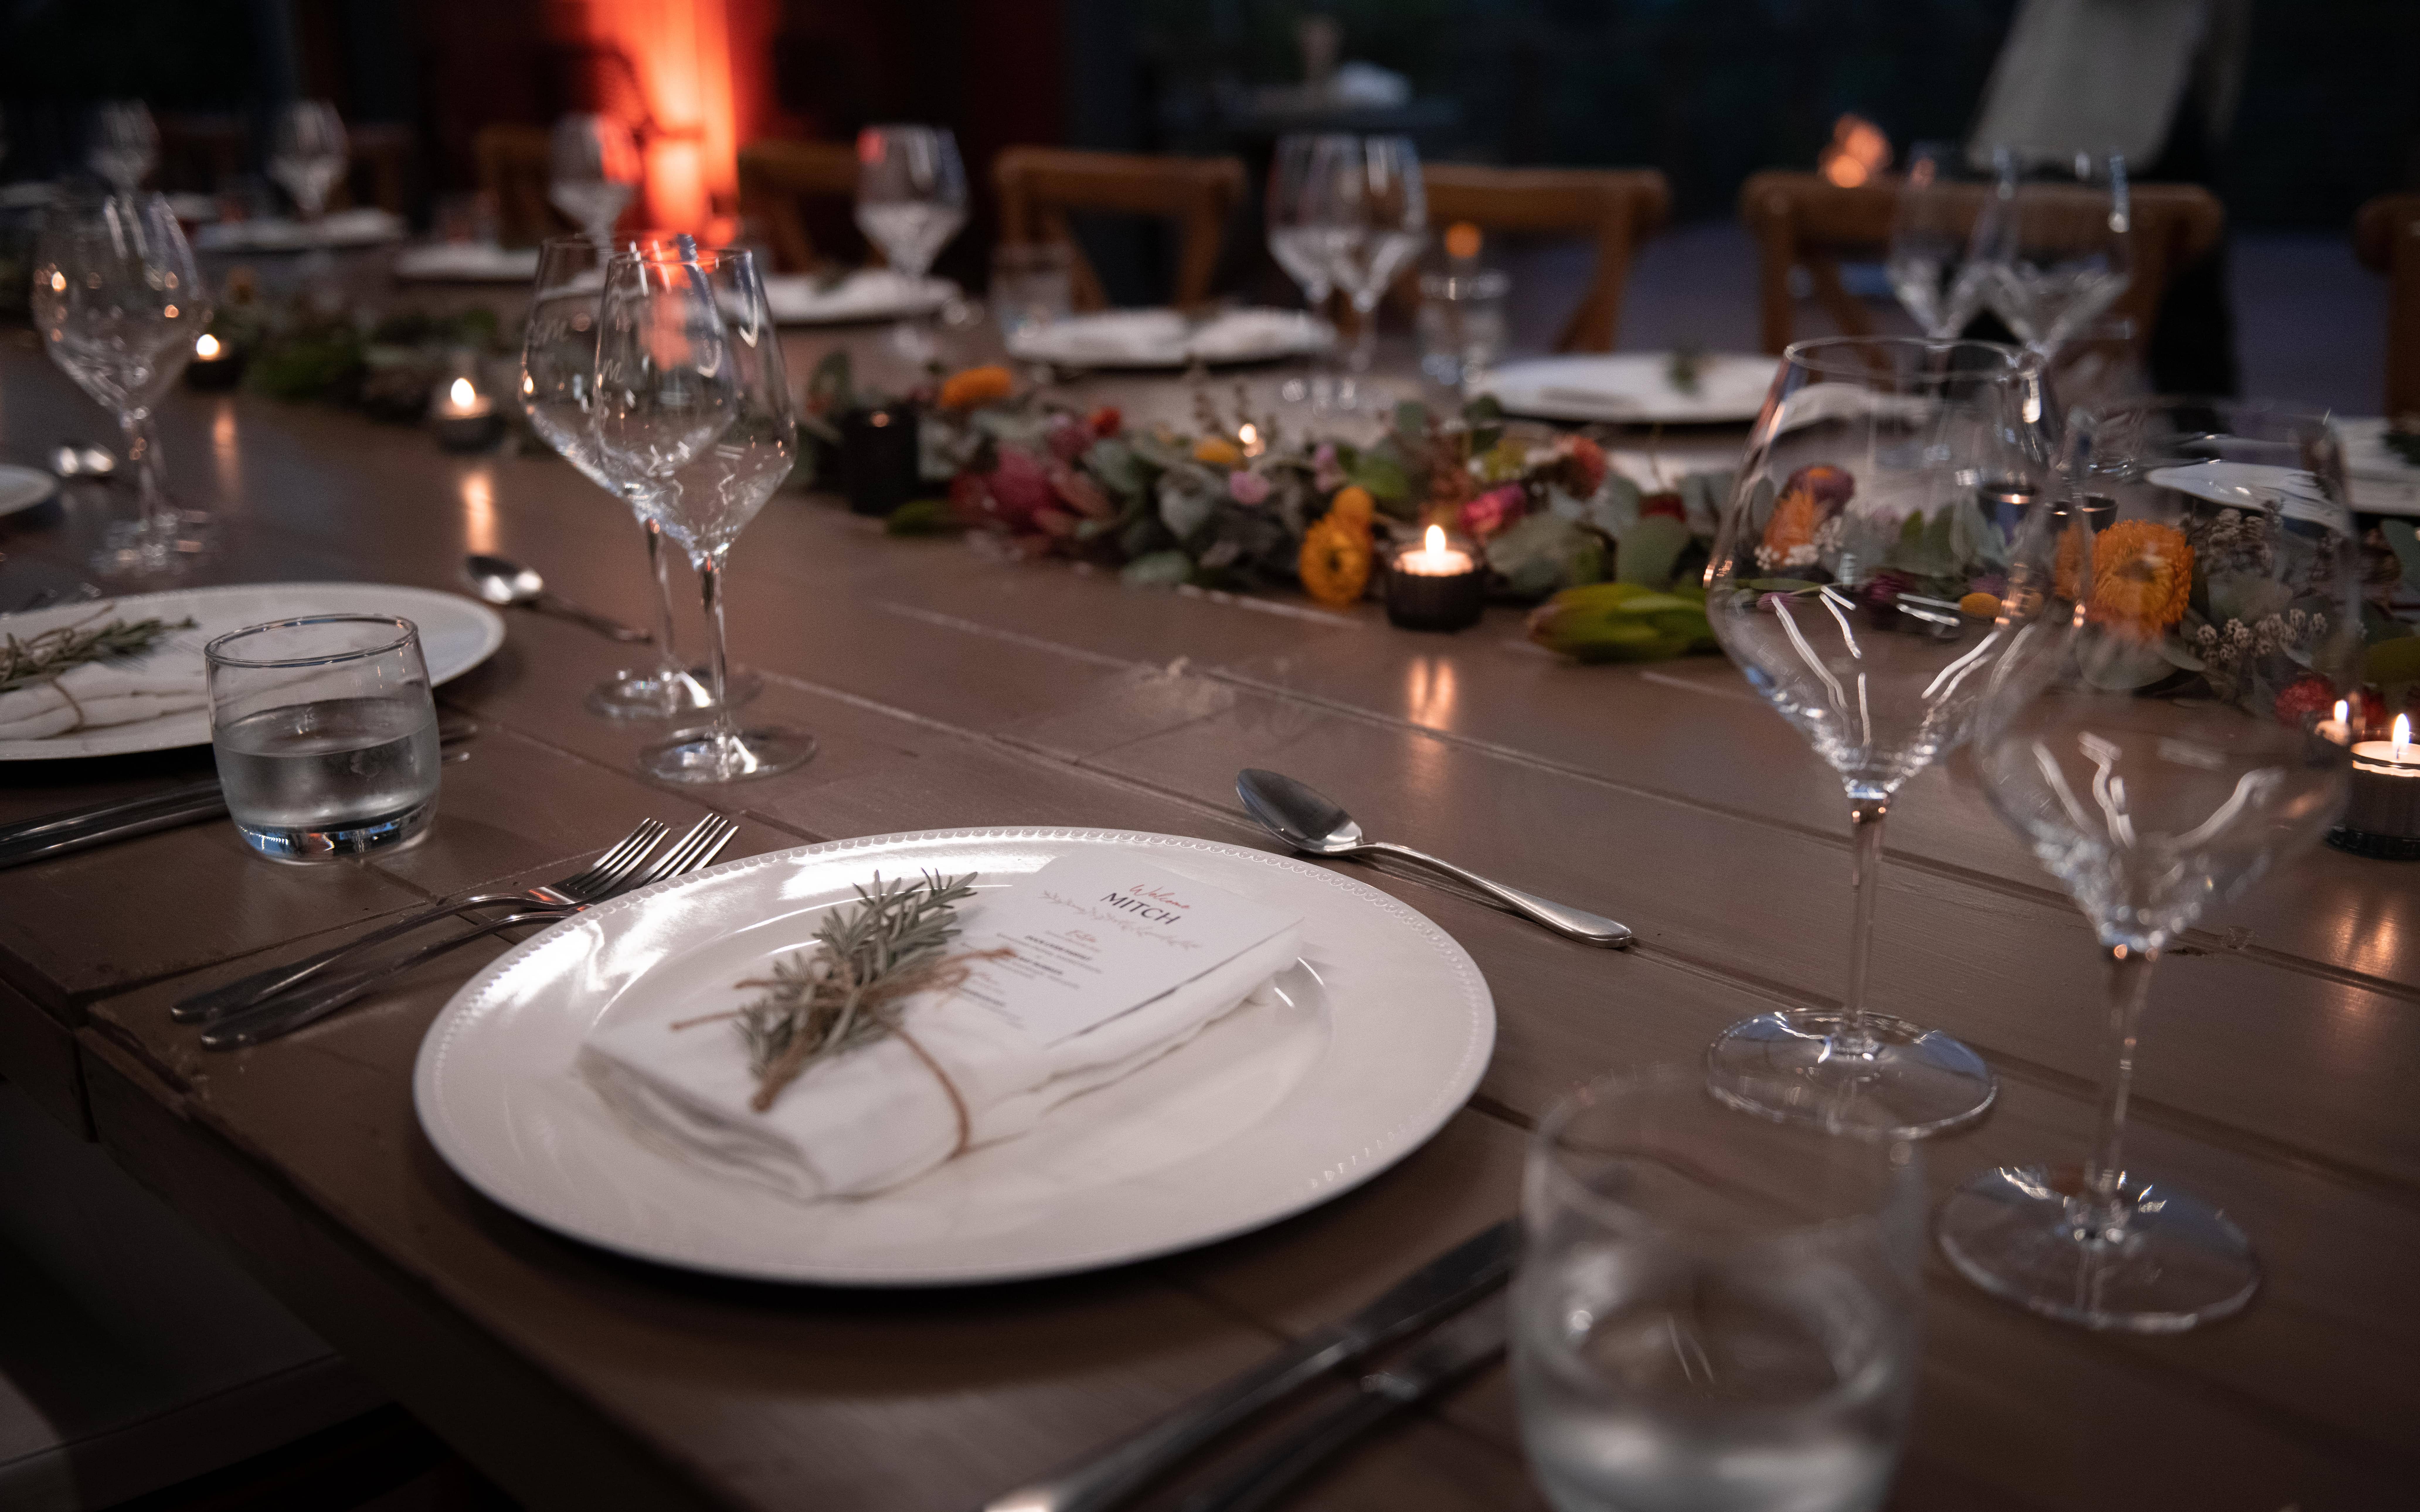 Real-wedding-Luke-and-Mitch-at-The-Crocodile-Lodge-Australia-Zoo-Queensland-wedding-reception-table-with-plates-wine-glass-and-cutleries